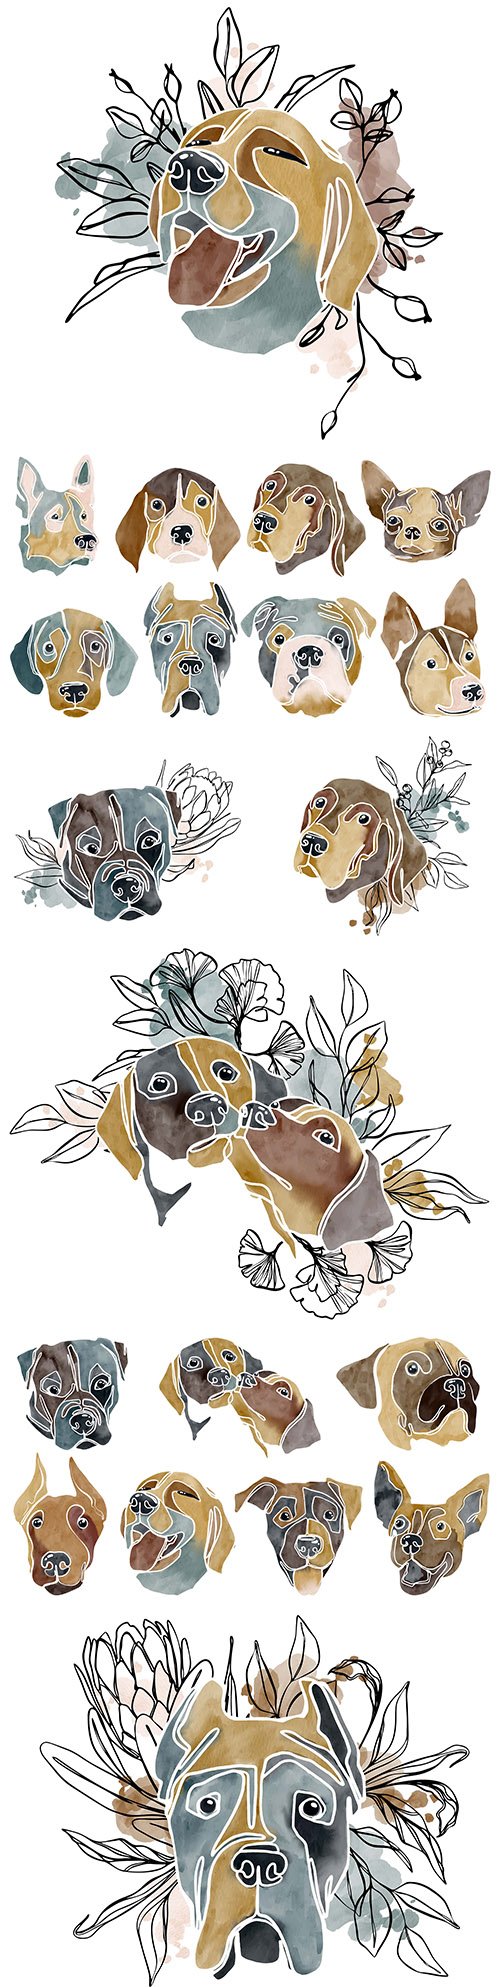 Dogs of different breeds abstract illustrations